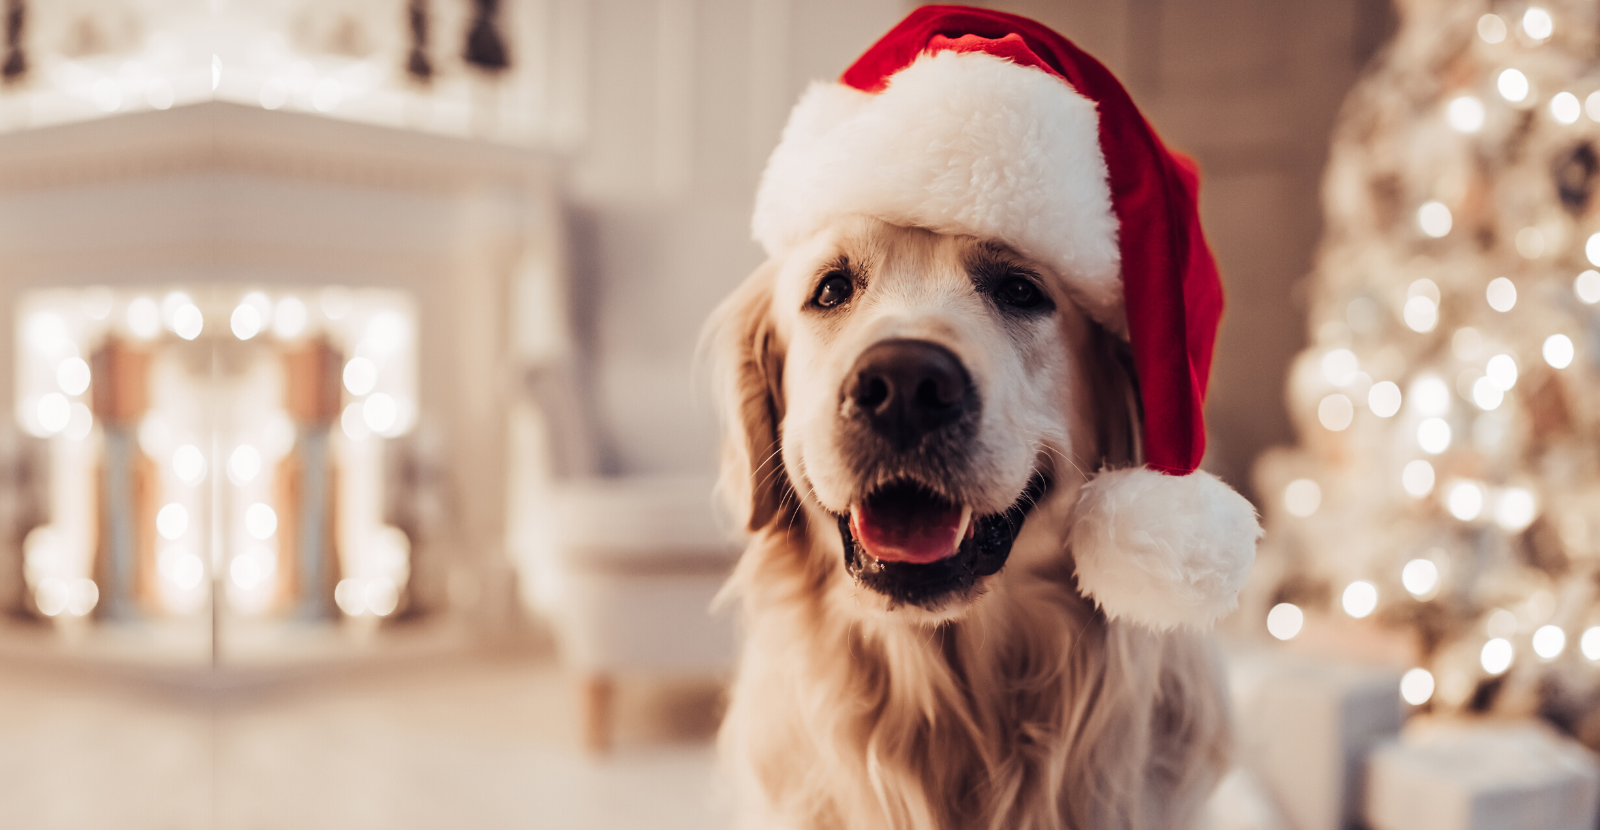 Top 10 Best Dog Christmas Gift Ideas in 2021